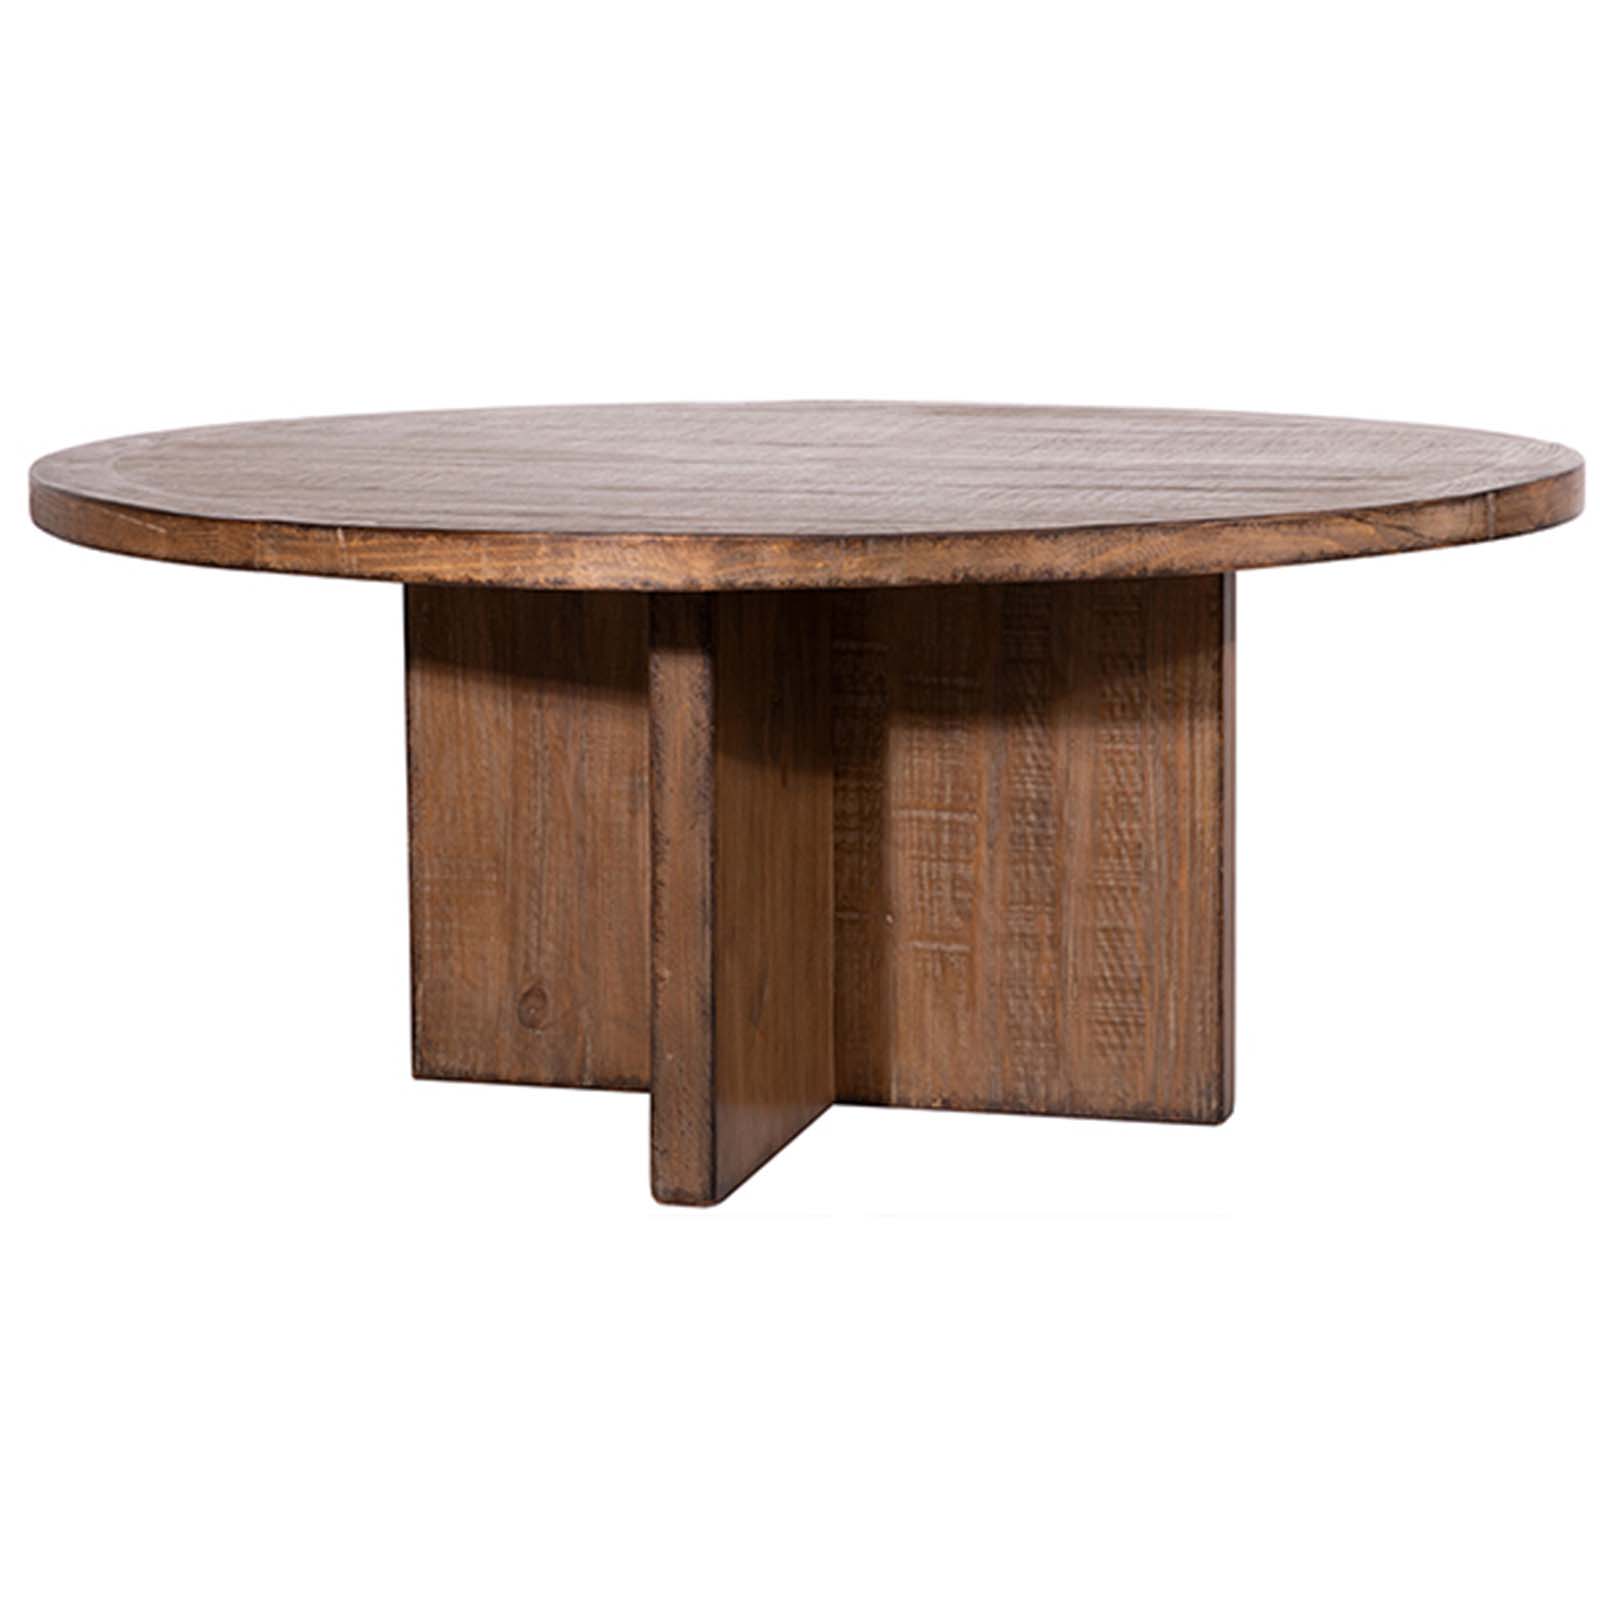 Hershel 72" Dining table